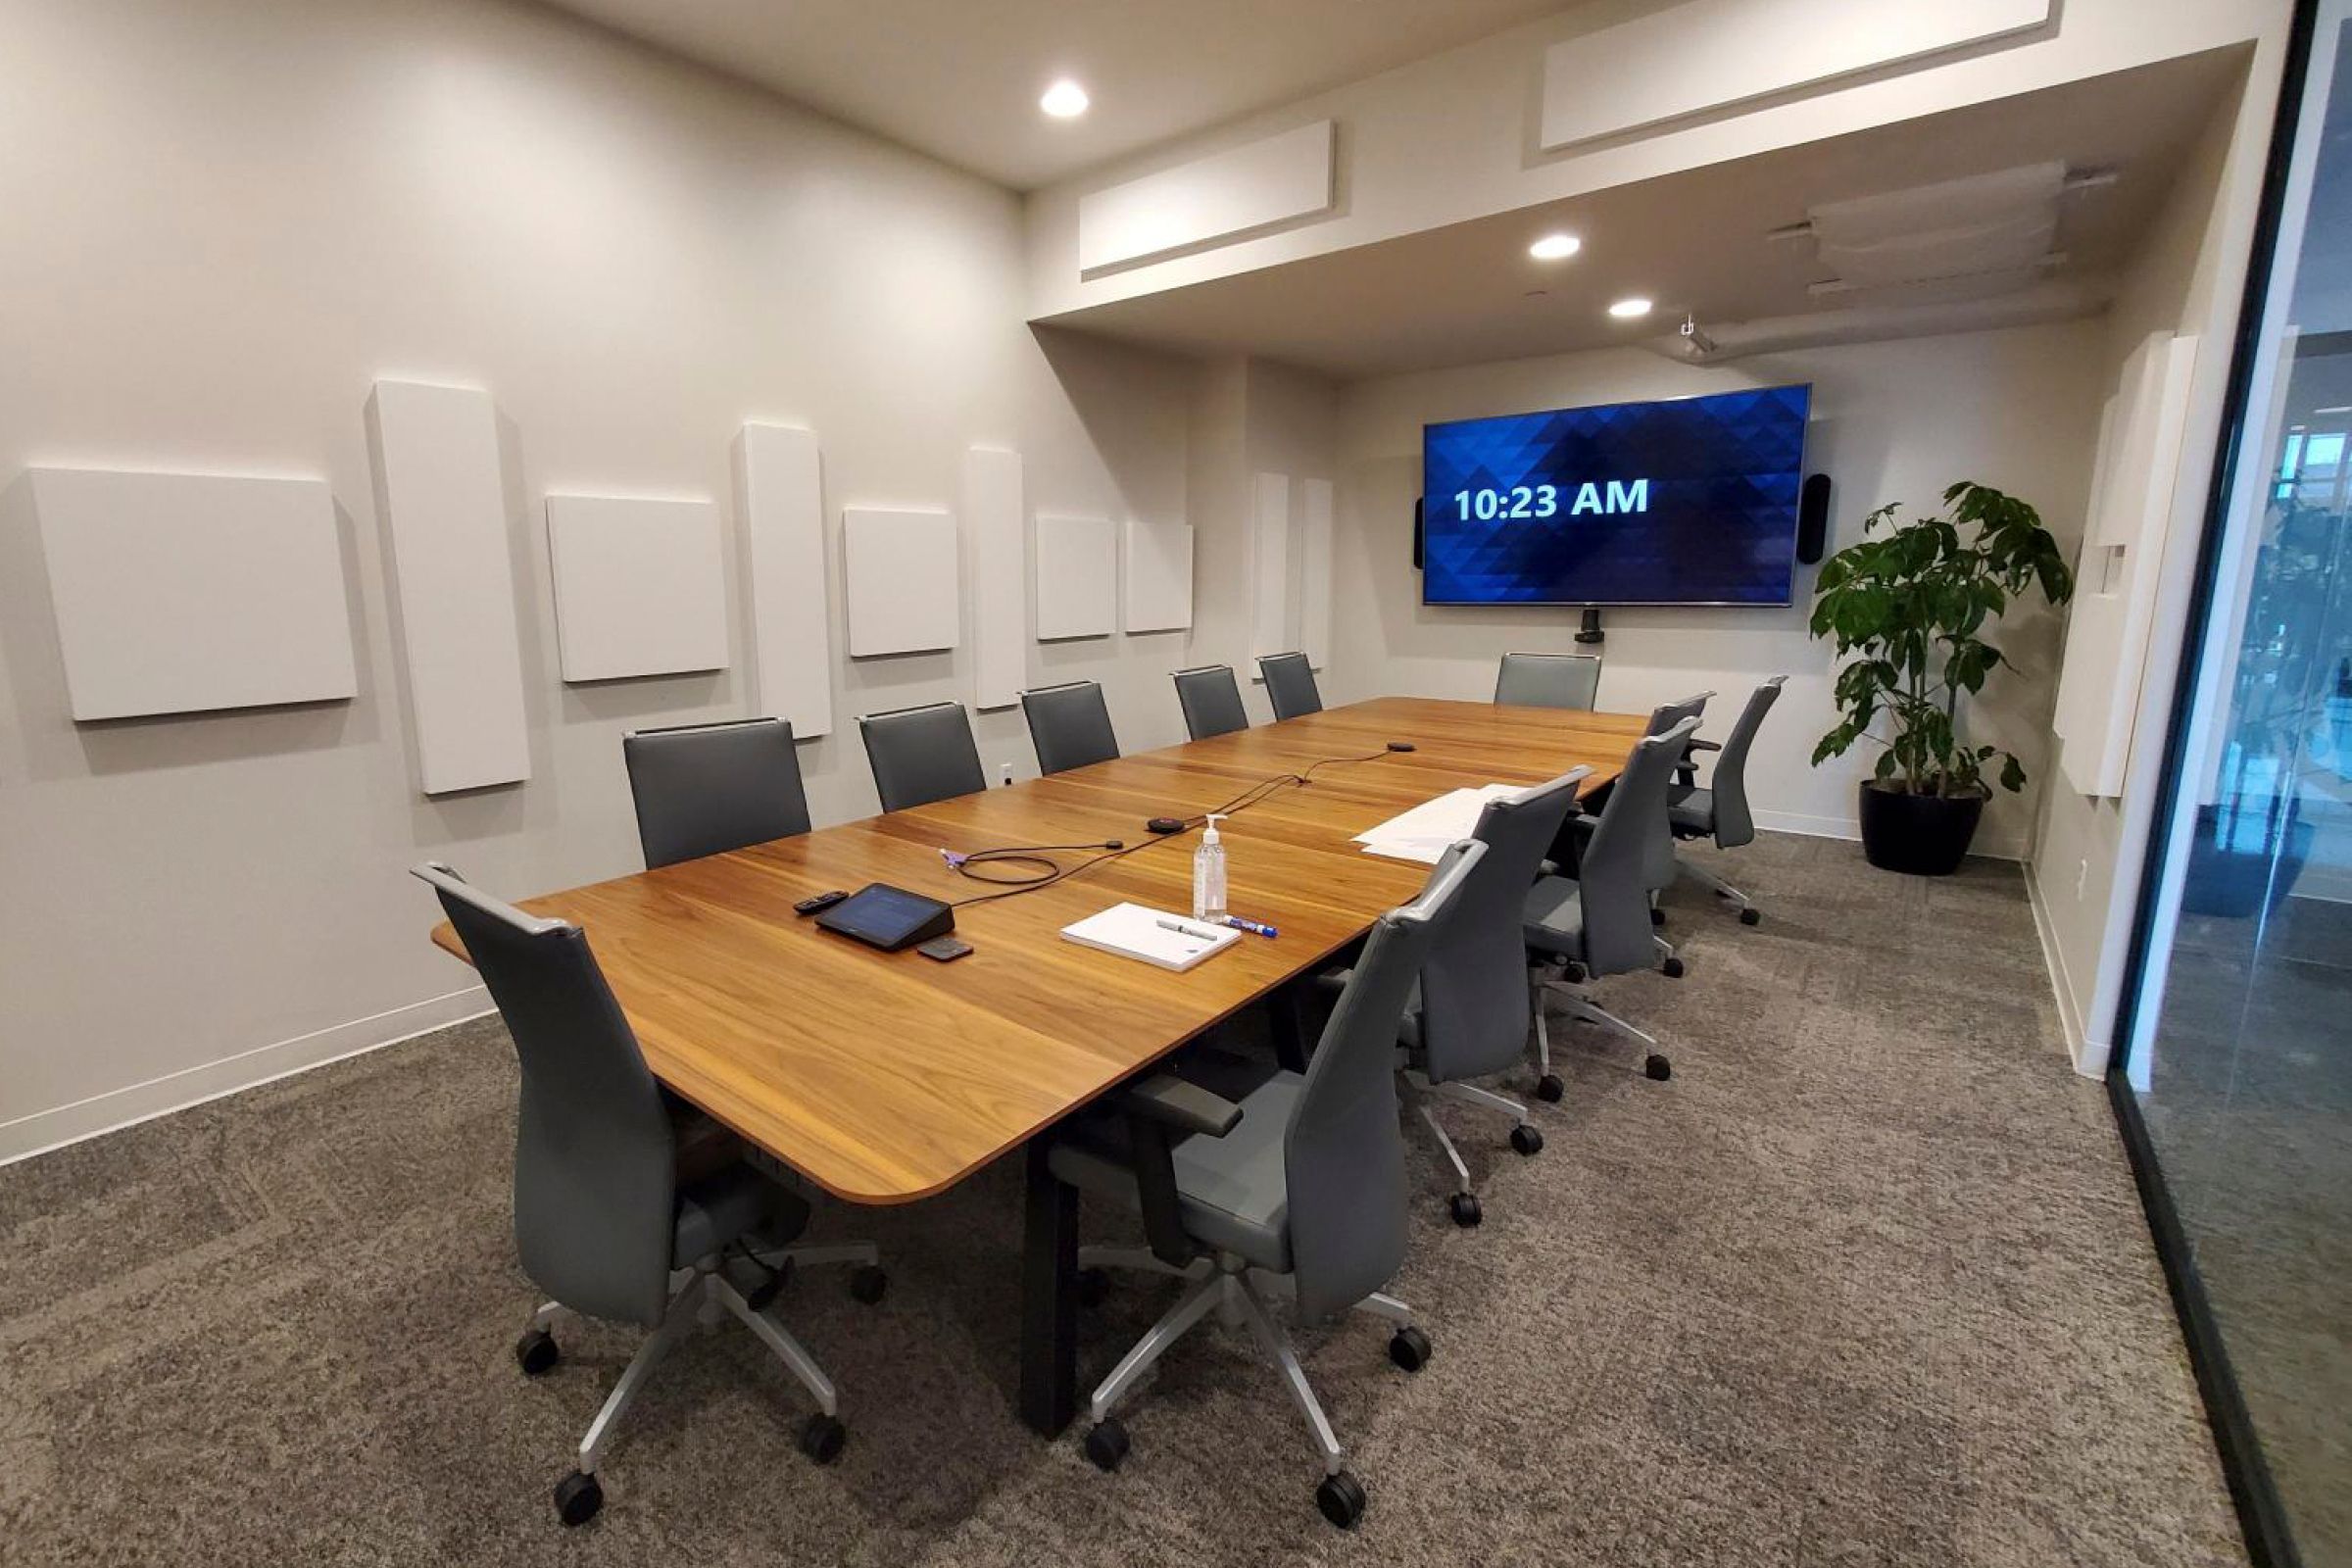 Boardroom with wooden table and white acoustic panels on walls